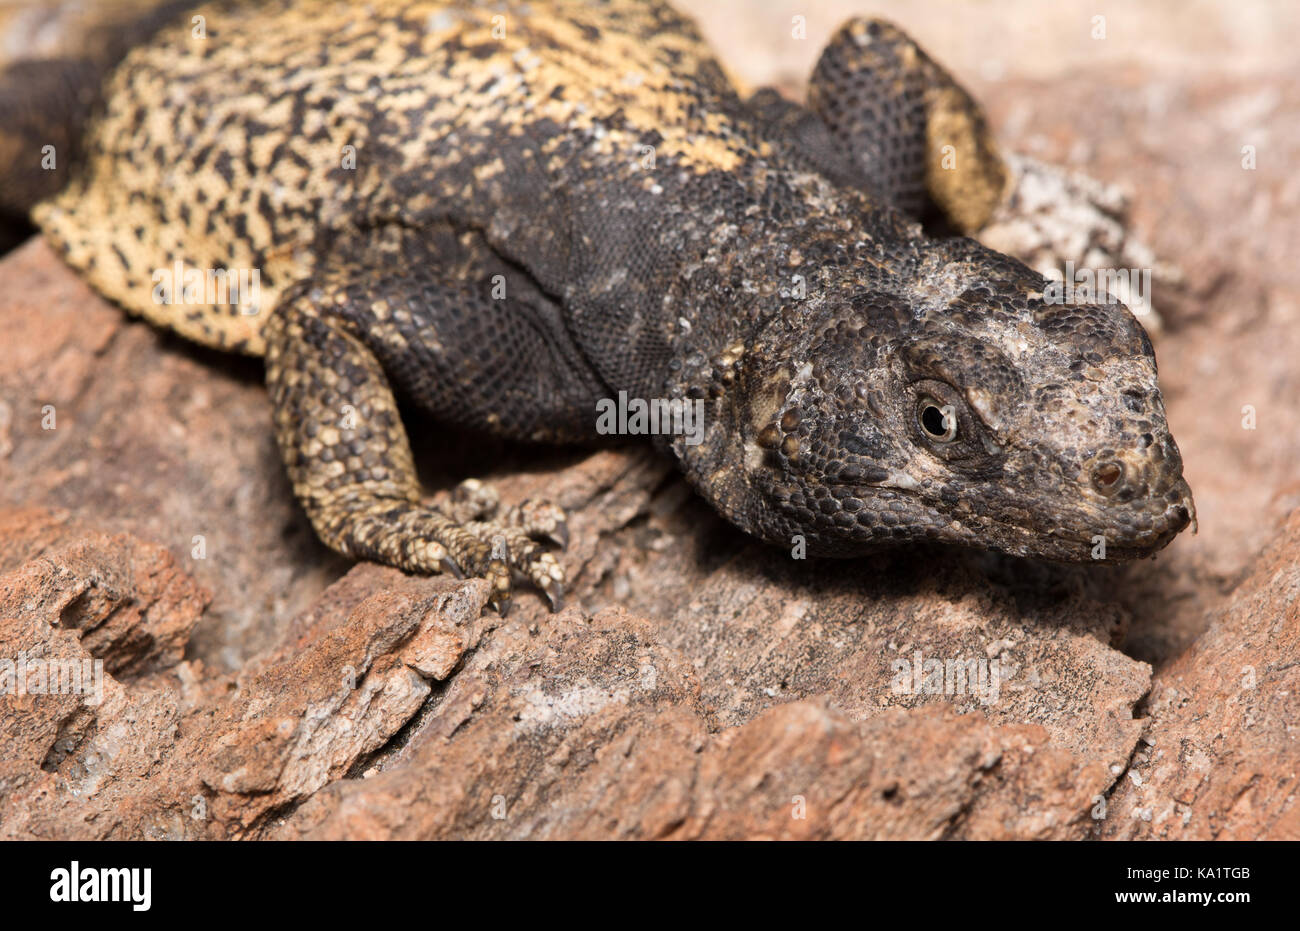 An adult male Common Chuckwalla (Sauromalus ater) from Sonora, Mexico. Stock Photo